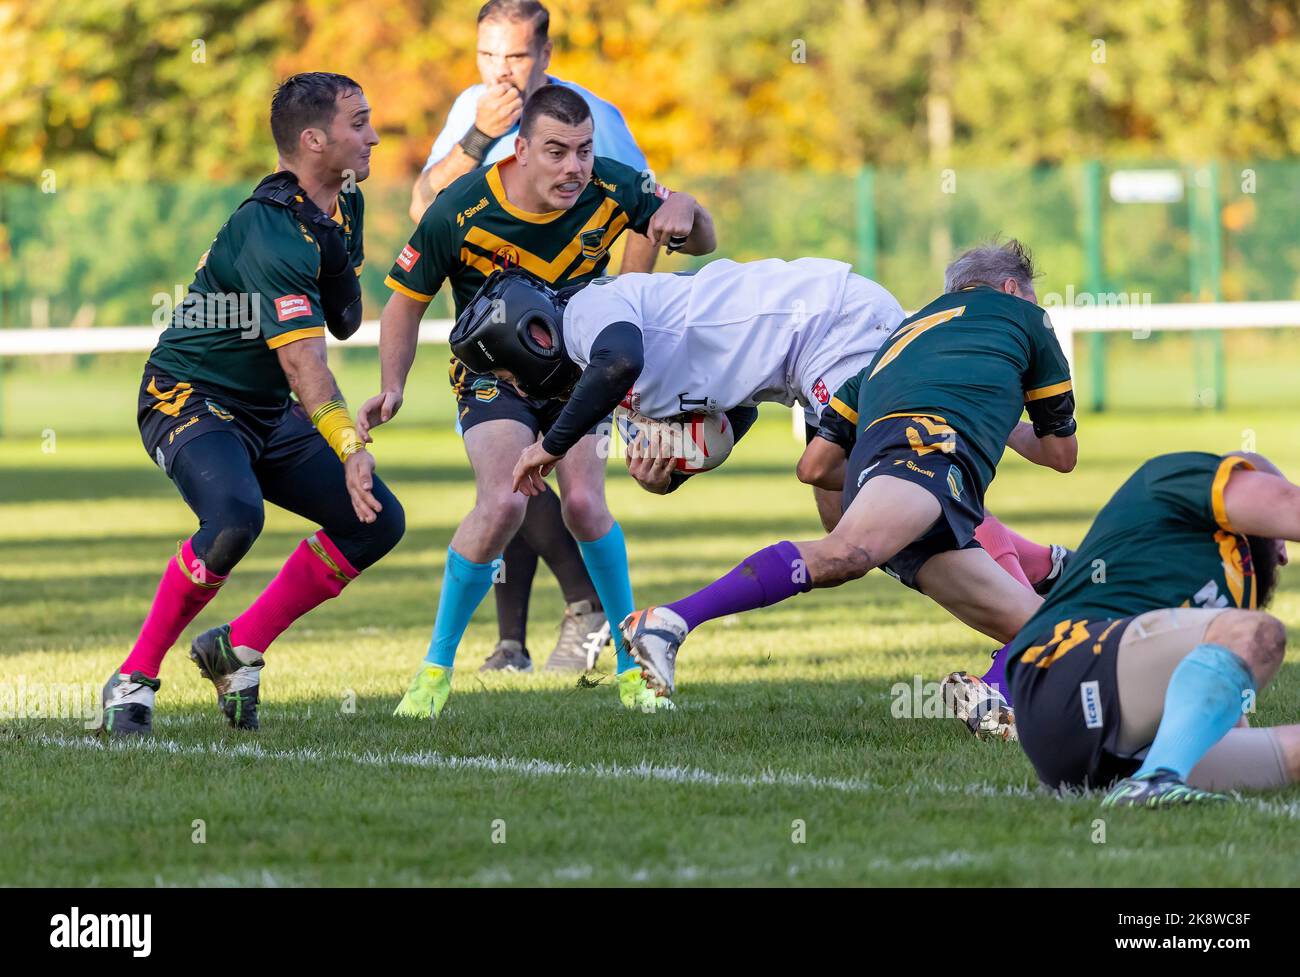 Physical Disability Rugby League World Cup at Victoria Park. England played Australia and were emphatic winners by 58 points to 6. Stock Photo